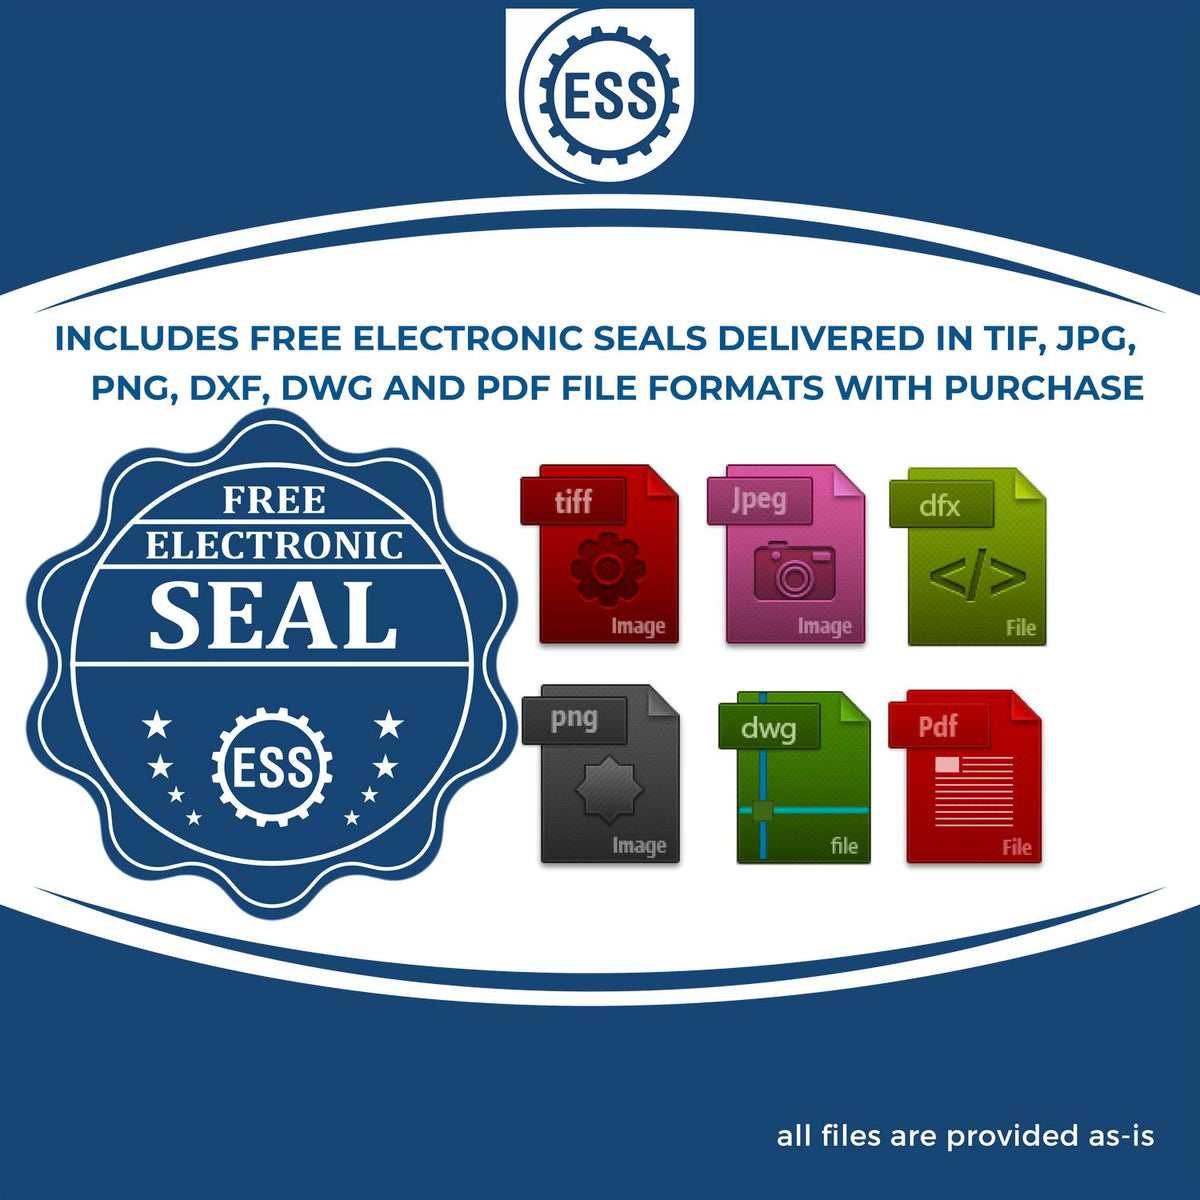 An infographic for the free electronic seal for the Slim Pre-Inked New Jersey Land Surveyor Seal Stamp illustrating the different file type icons such as DXF, DWG, TIF, JPG and PNG.